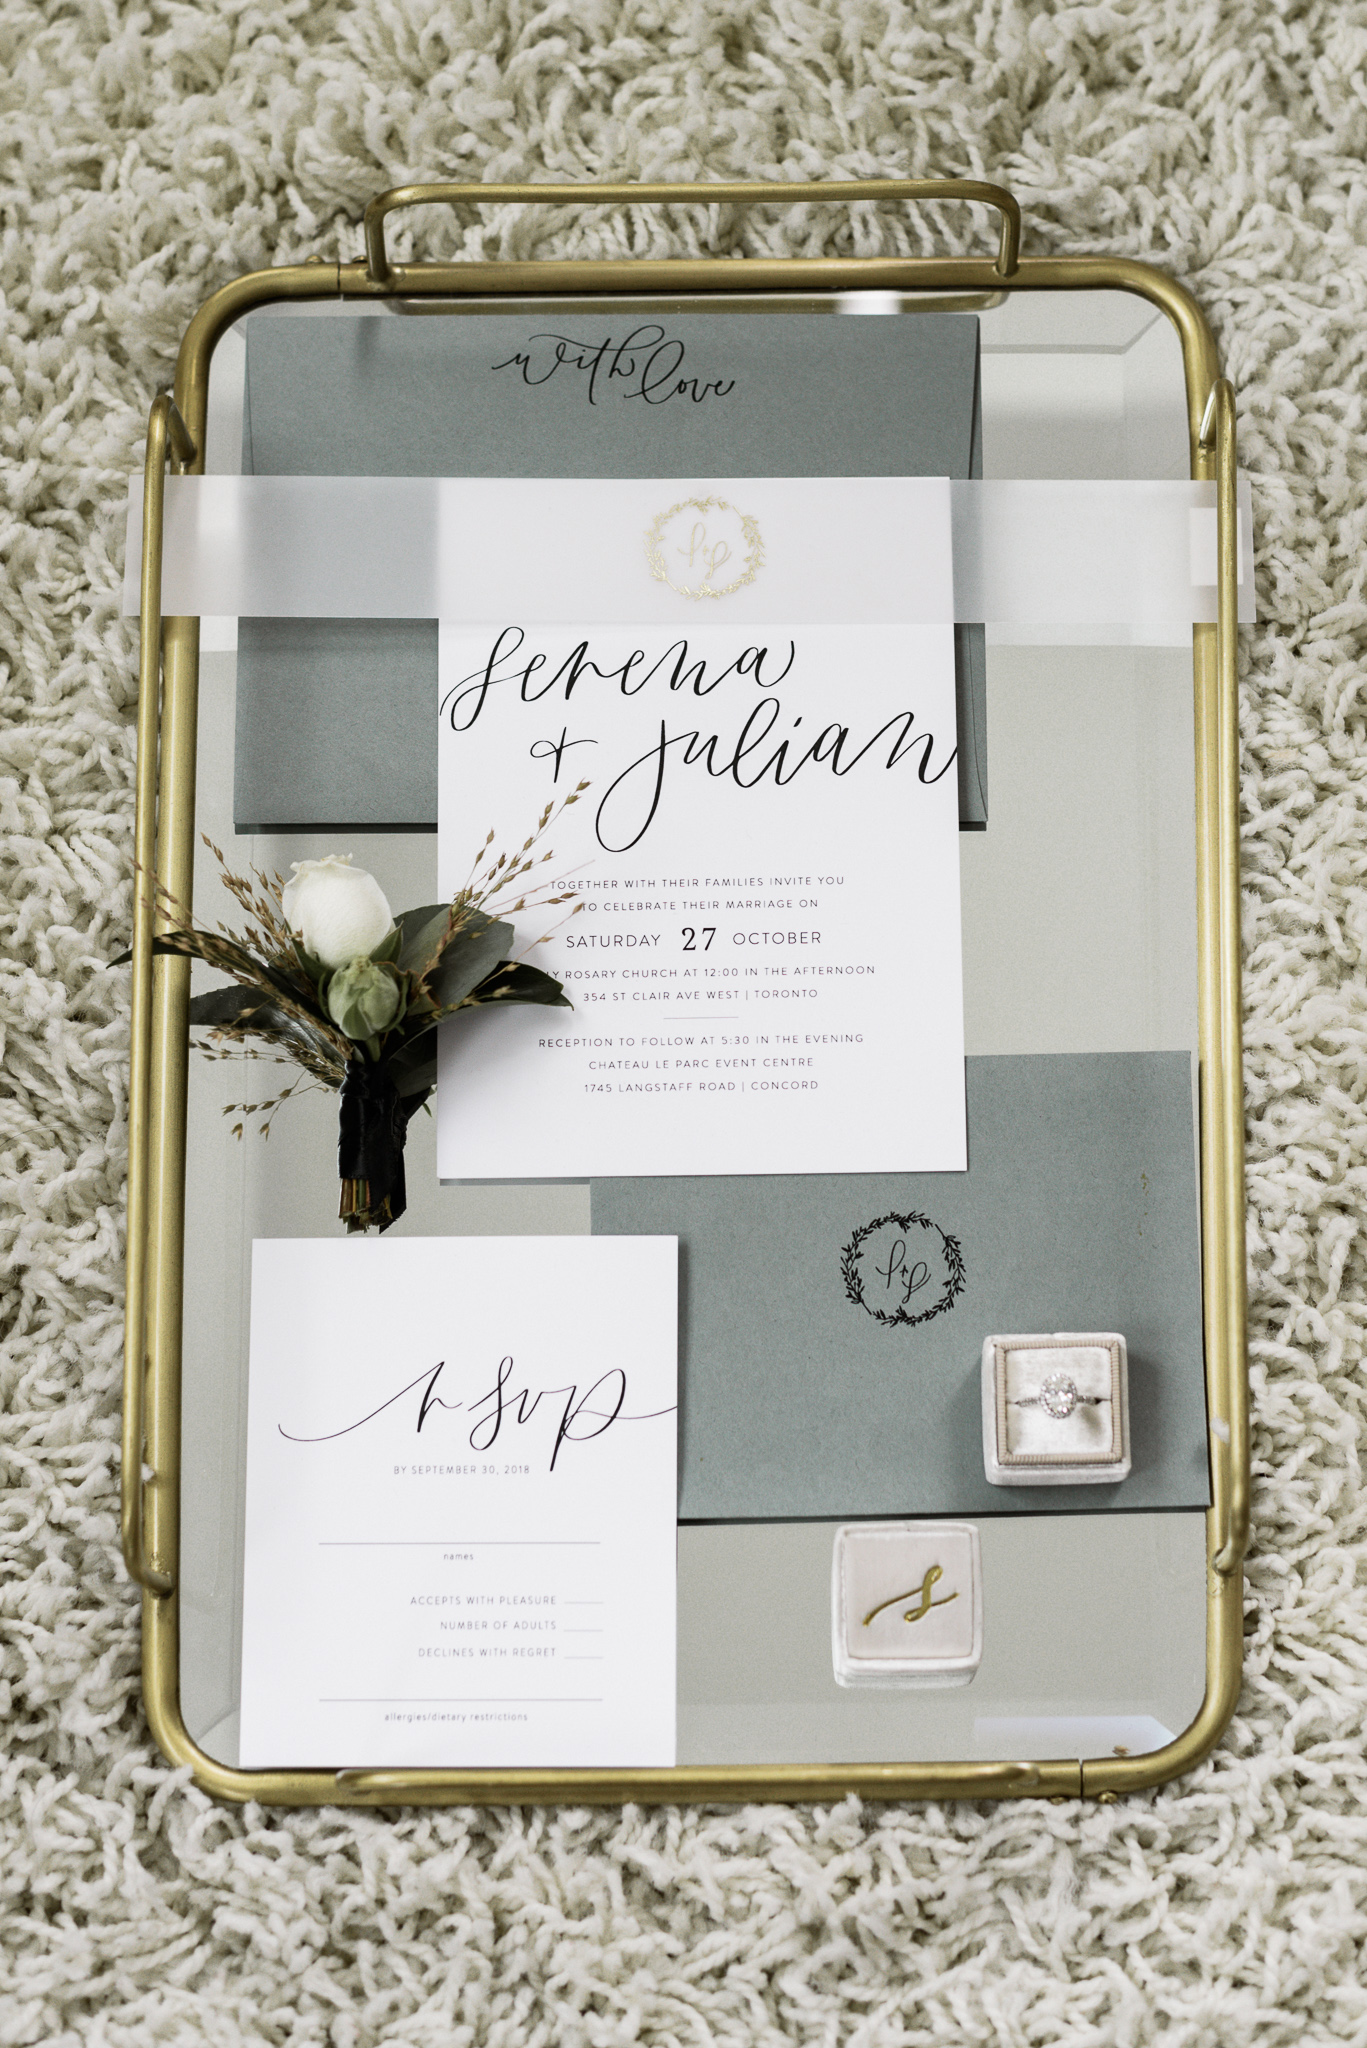 Black, white, and pale blue invitation set by Pear tree and Clover